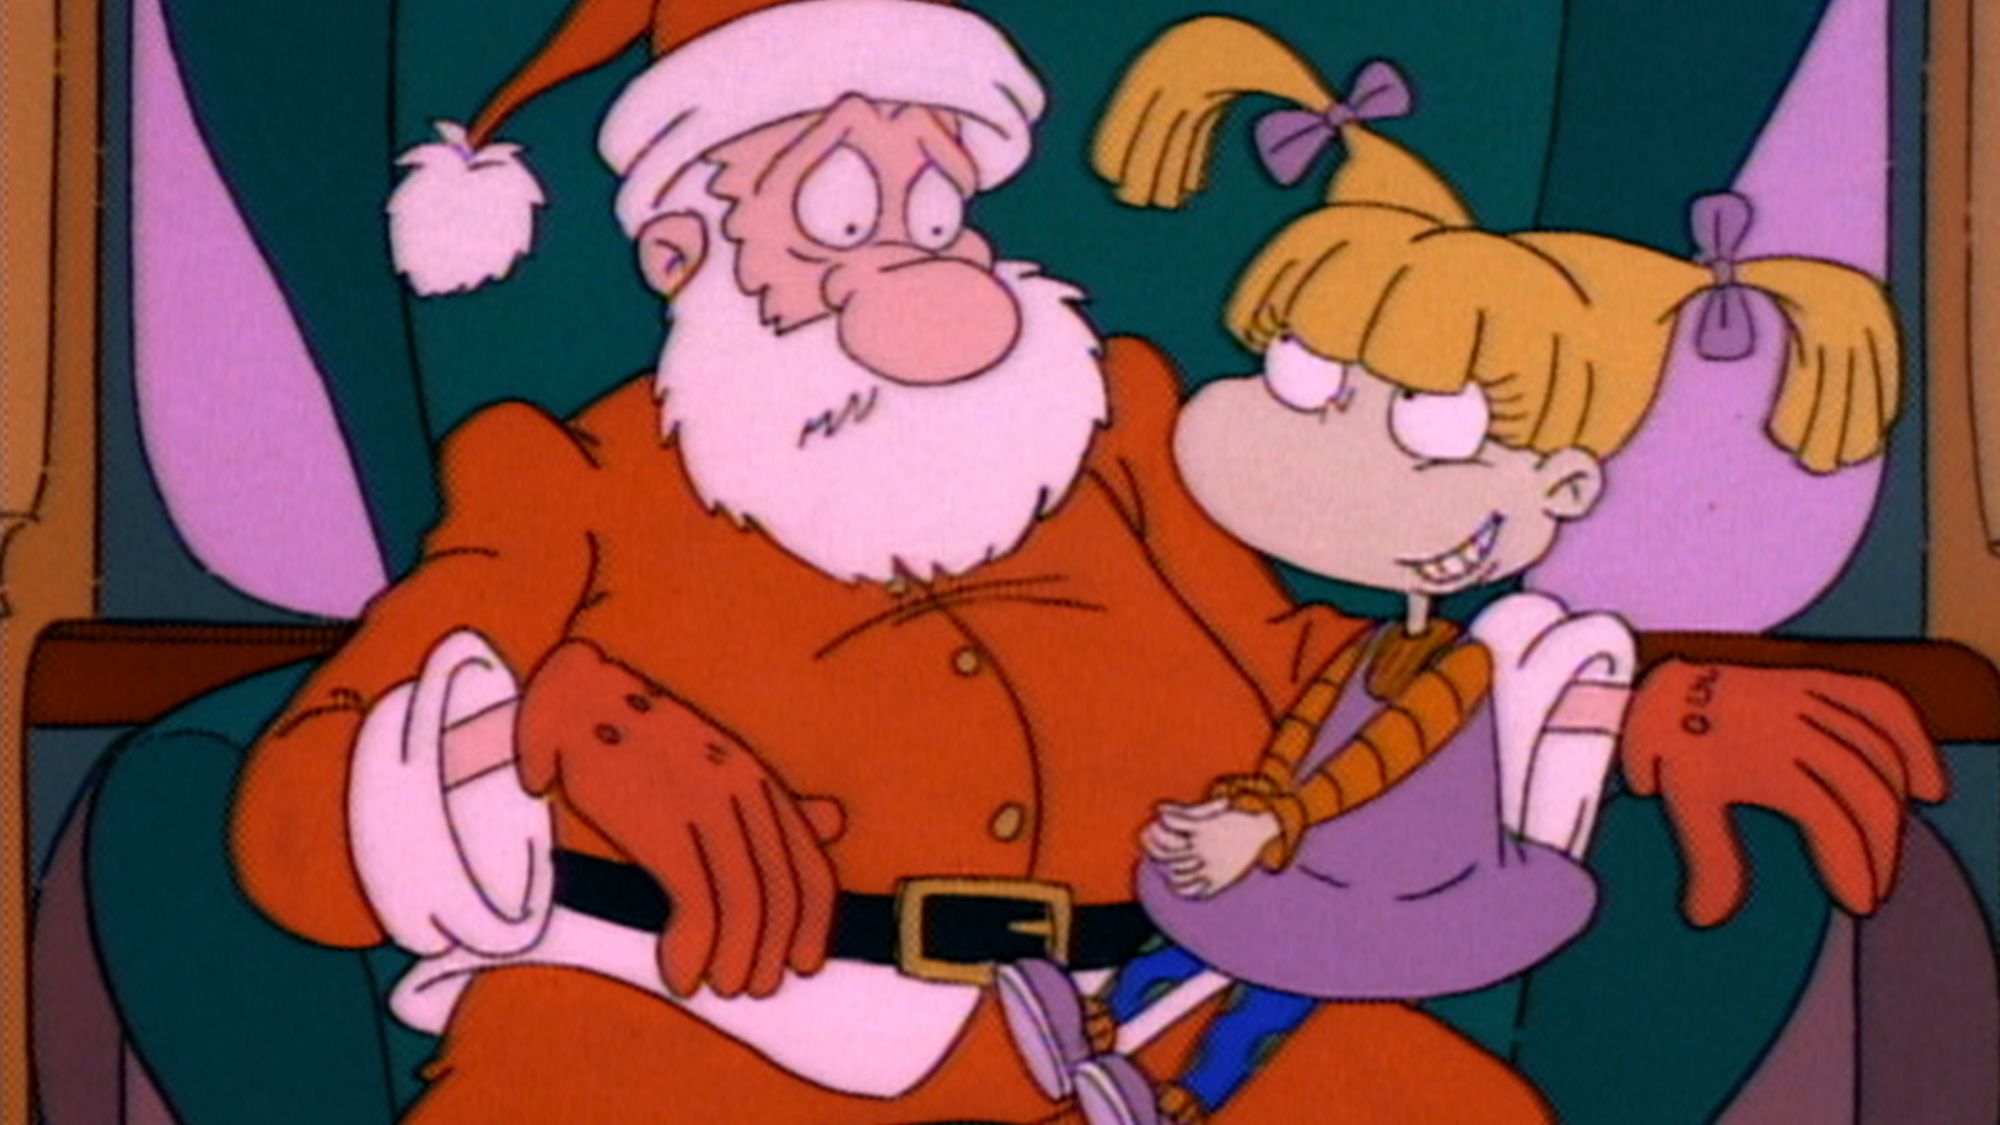 'Rugrats' Santa and Angelica Pickles. Angelica is sitting on his lap, smiling. He's looking at her with a concerned expression.